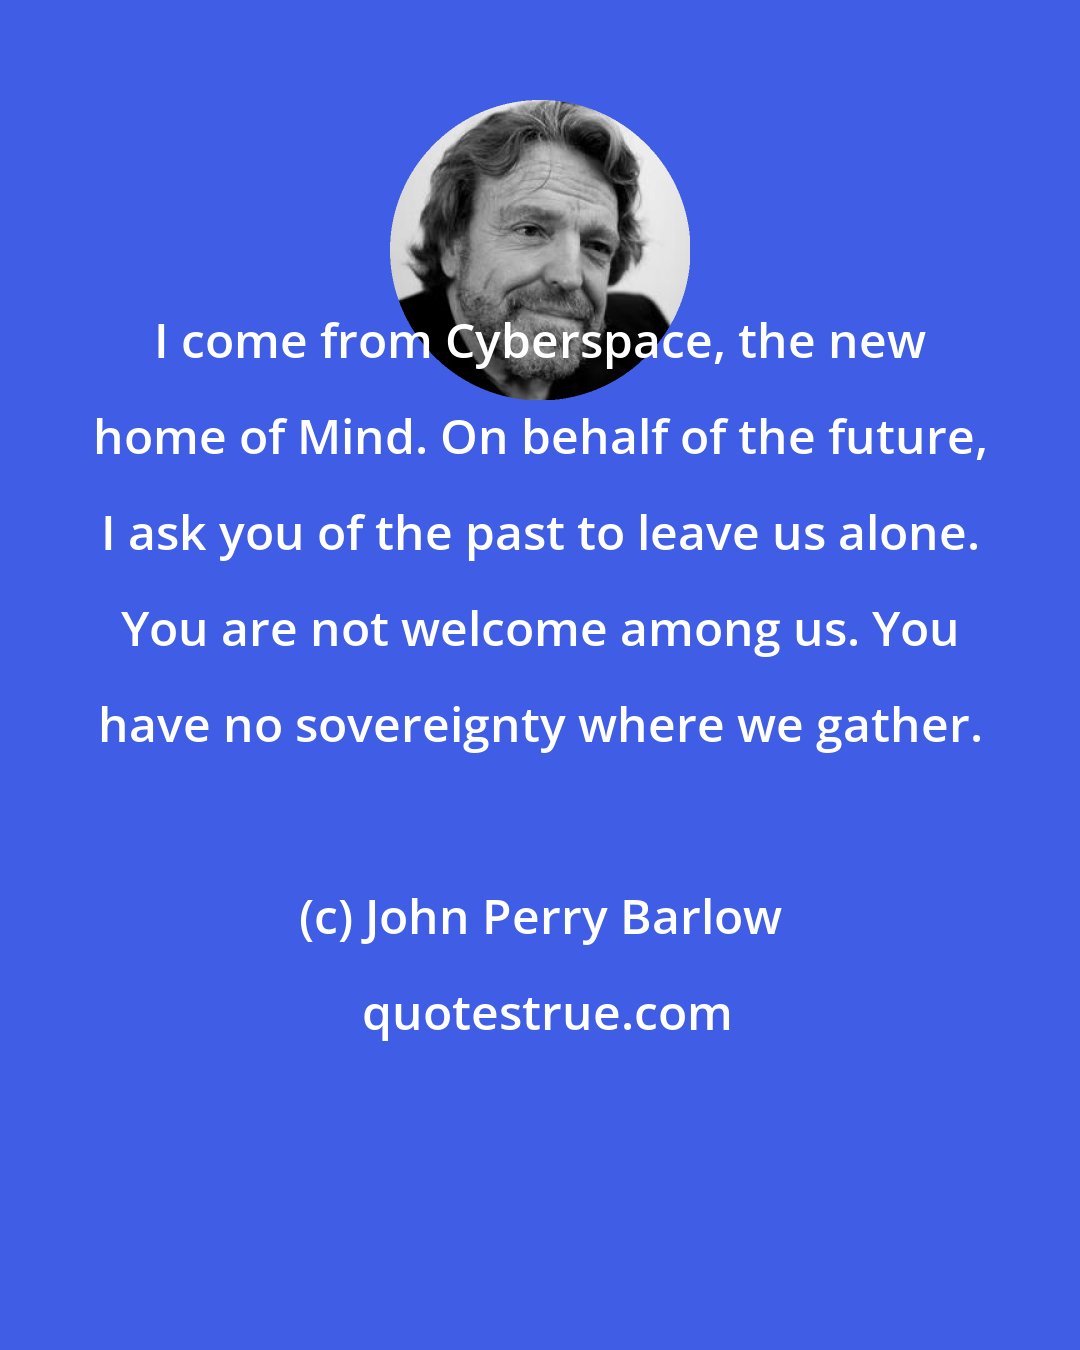 John Perry Barlow: I come from Cyberspace, the new home of Mind. On behalf of the future, I ask you of the past to leave us alone. You are not welcome among us. You have no sovereignty where we gather.